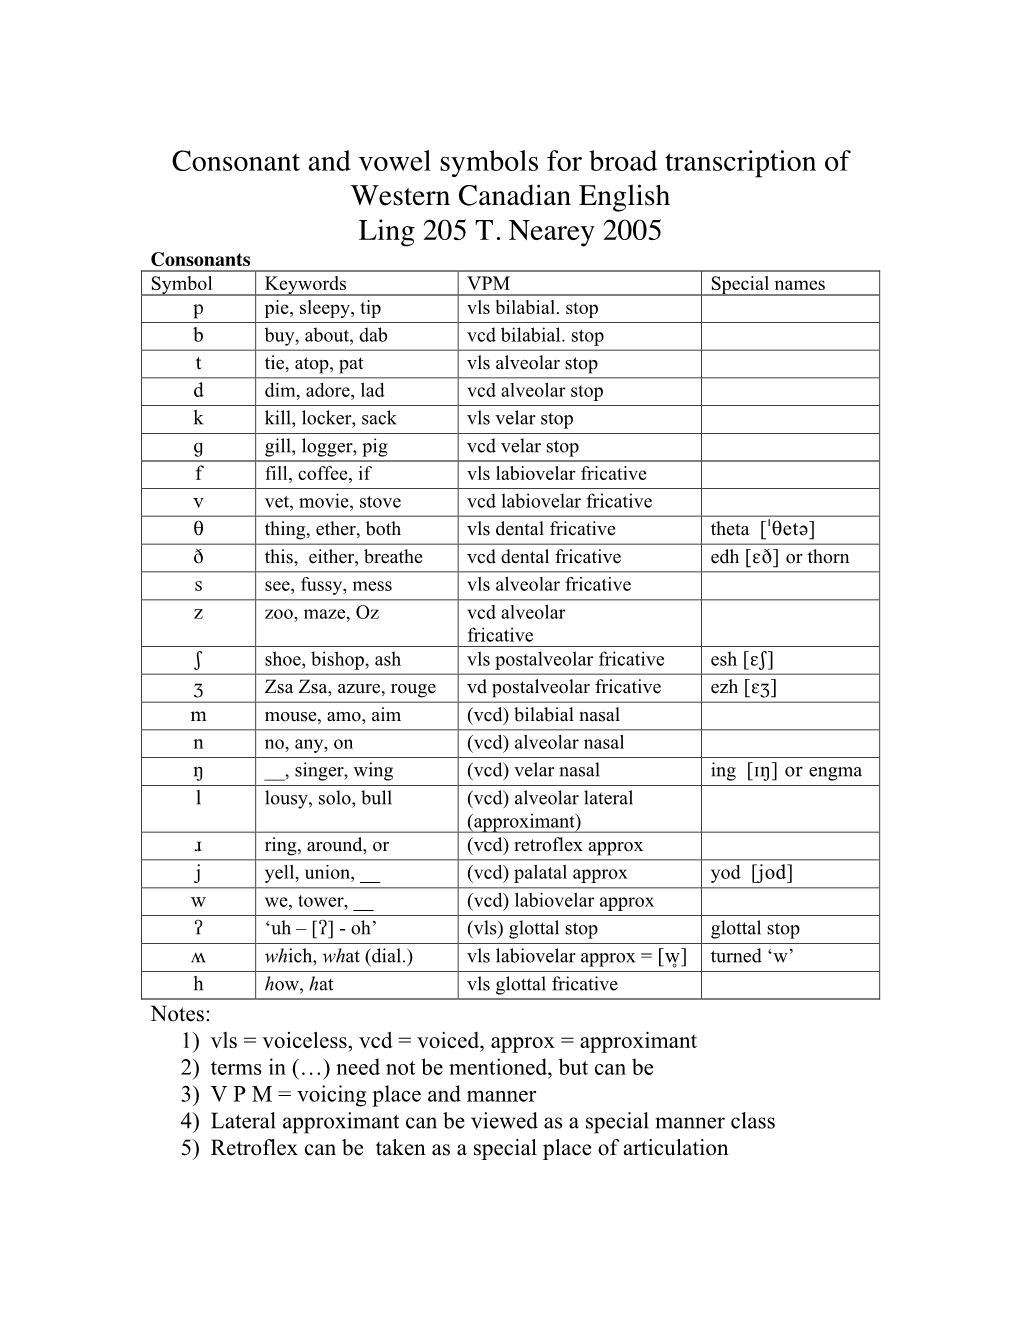 Consonant and Vowel Symbols for Broad Transcription of Western Canadian English Ling 205 T